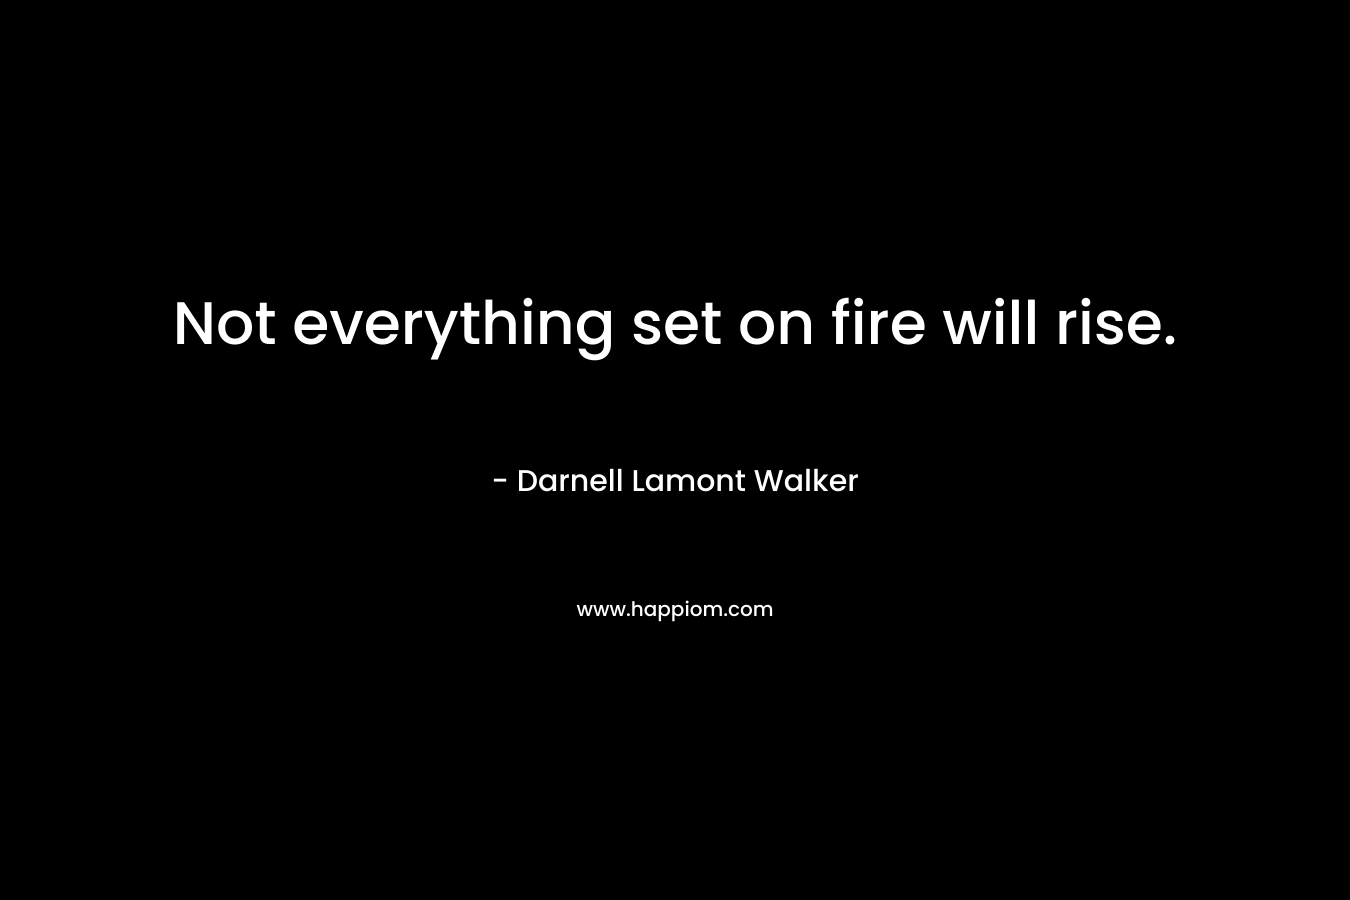 Not everything set on fire will rise. – Darnell Lamont Walker